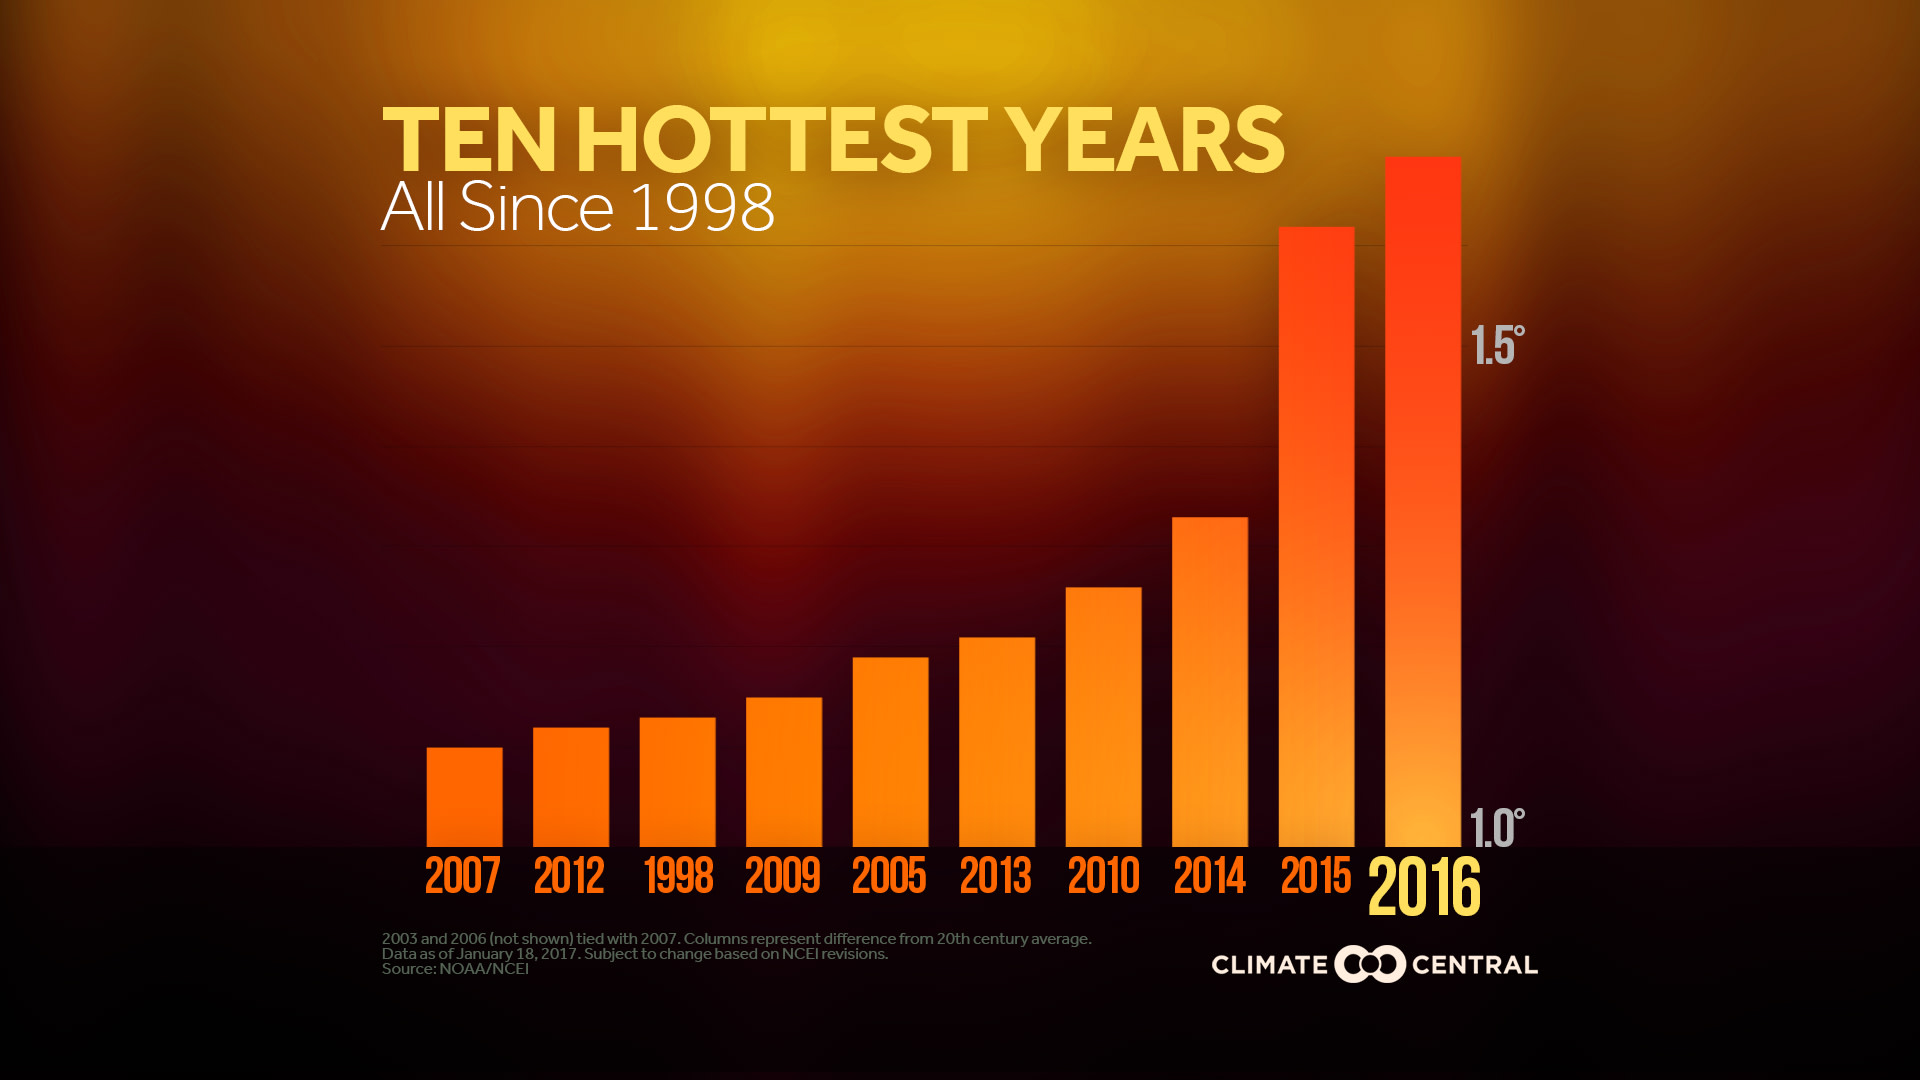 Set 1 - 2016: Hottest Year on Record